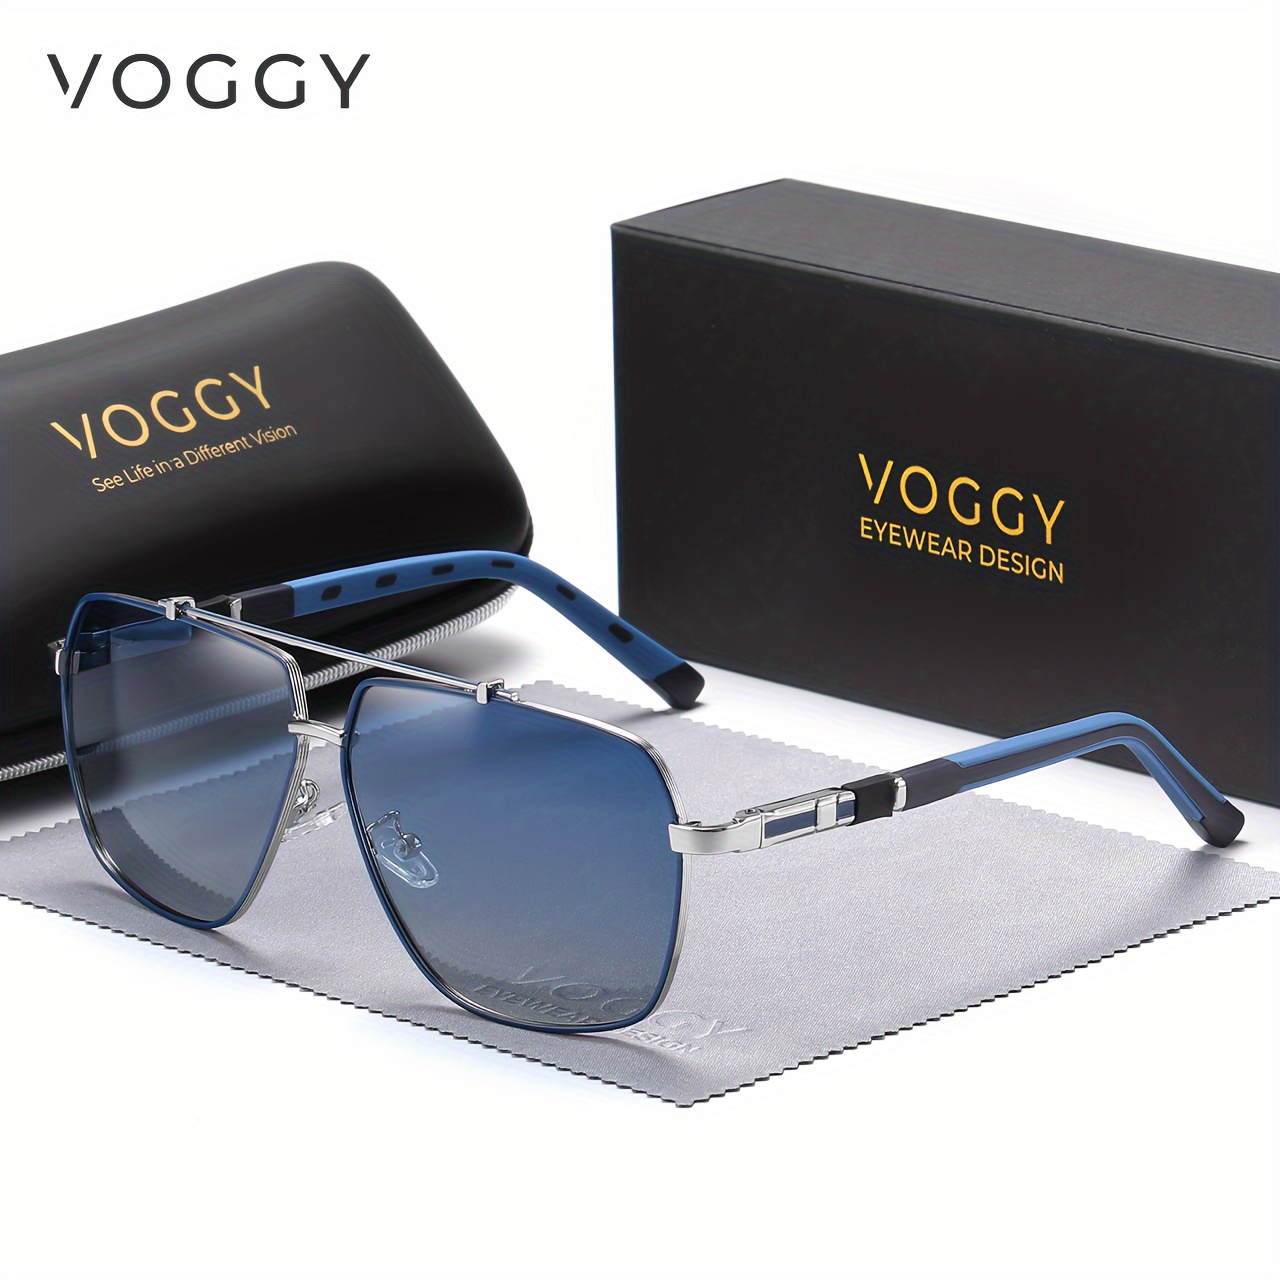 

Voggy Polarized Sunglasses For Women Men Vintage Metal Frame Sun Shades For Driving Beach Travel With Gifts Box For Mother's Day